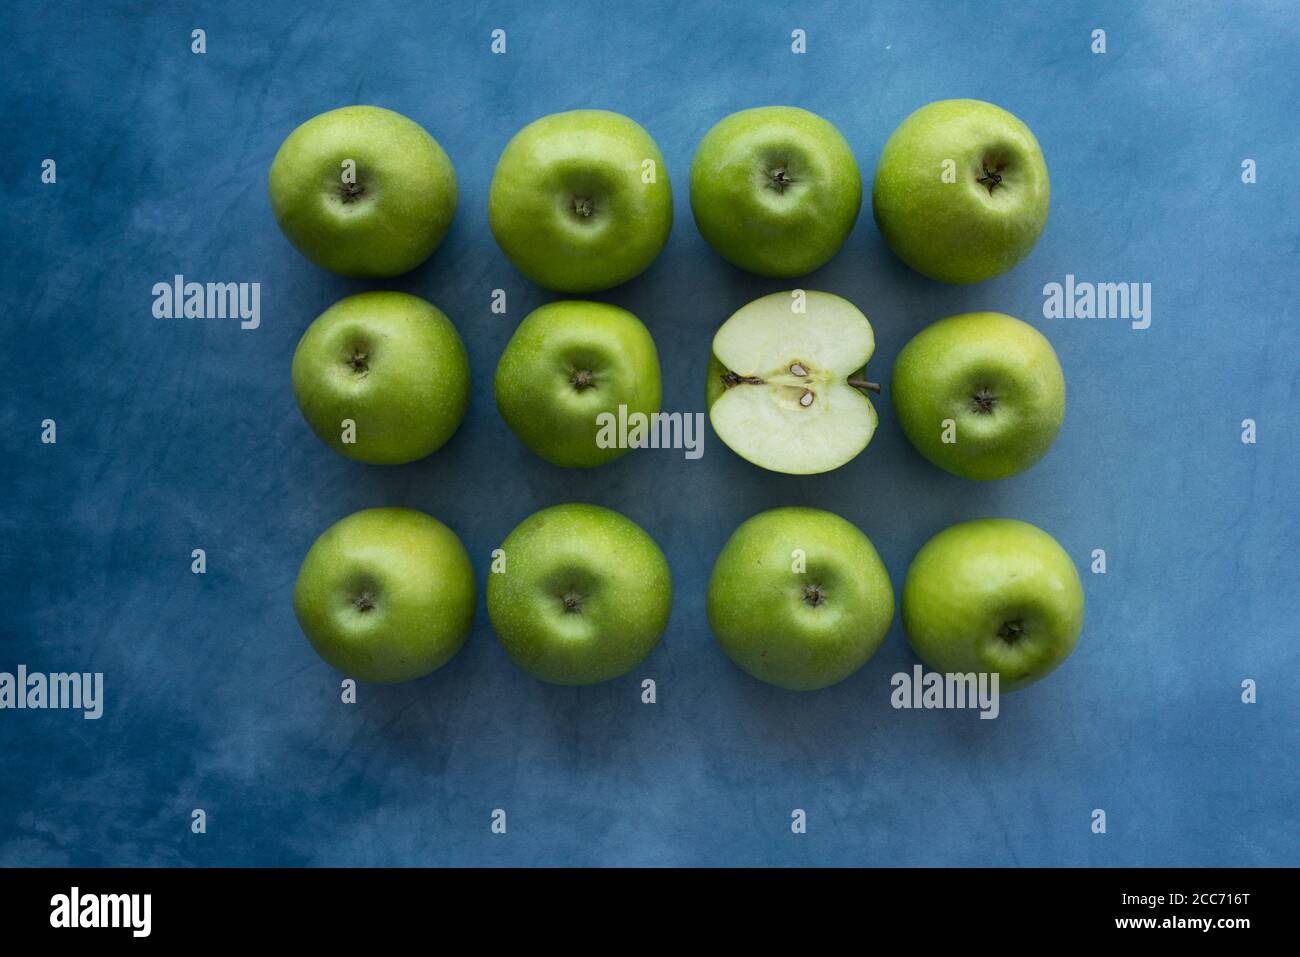 Bright green apples on blue background. Stock Photo